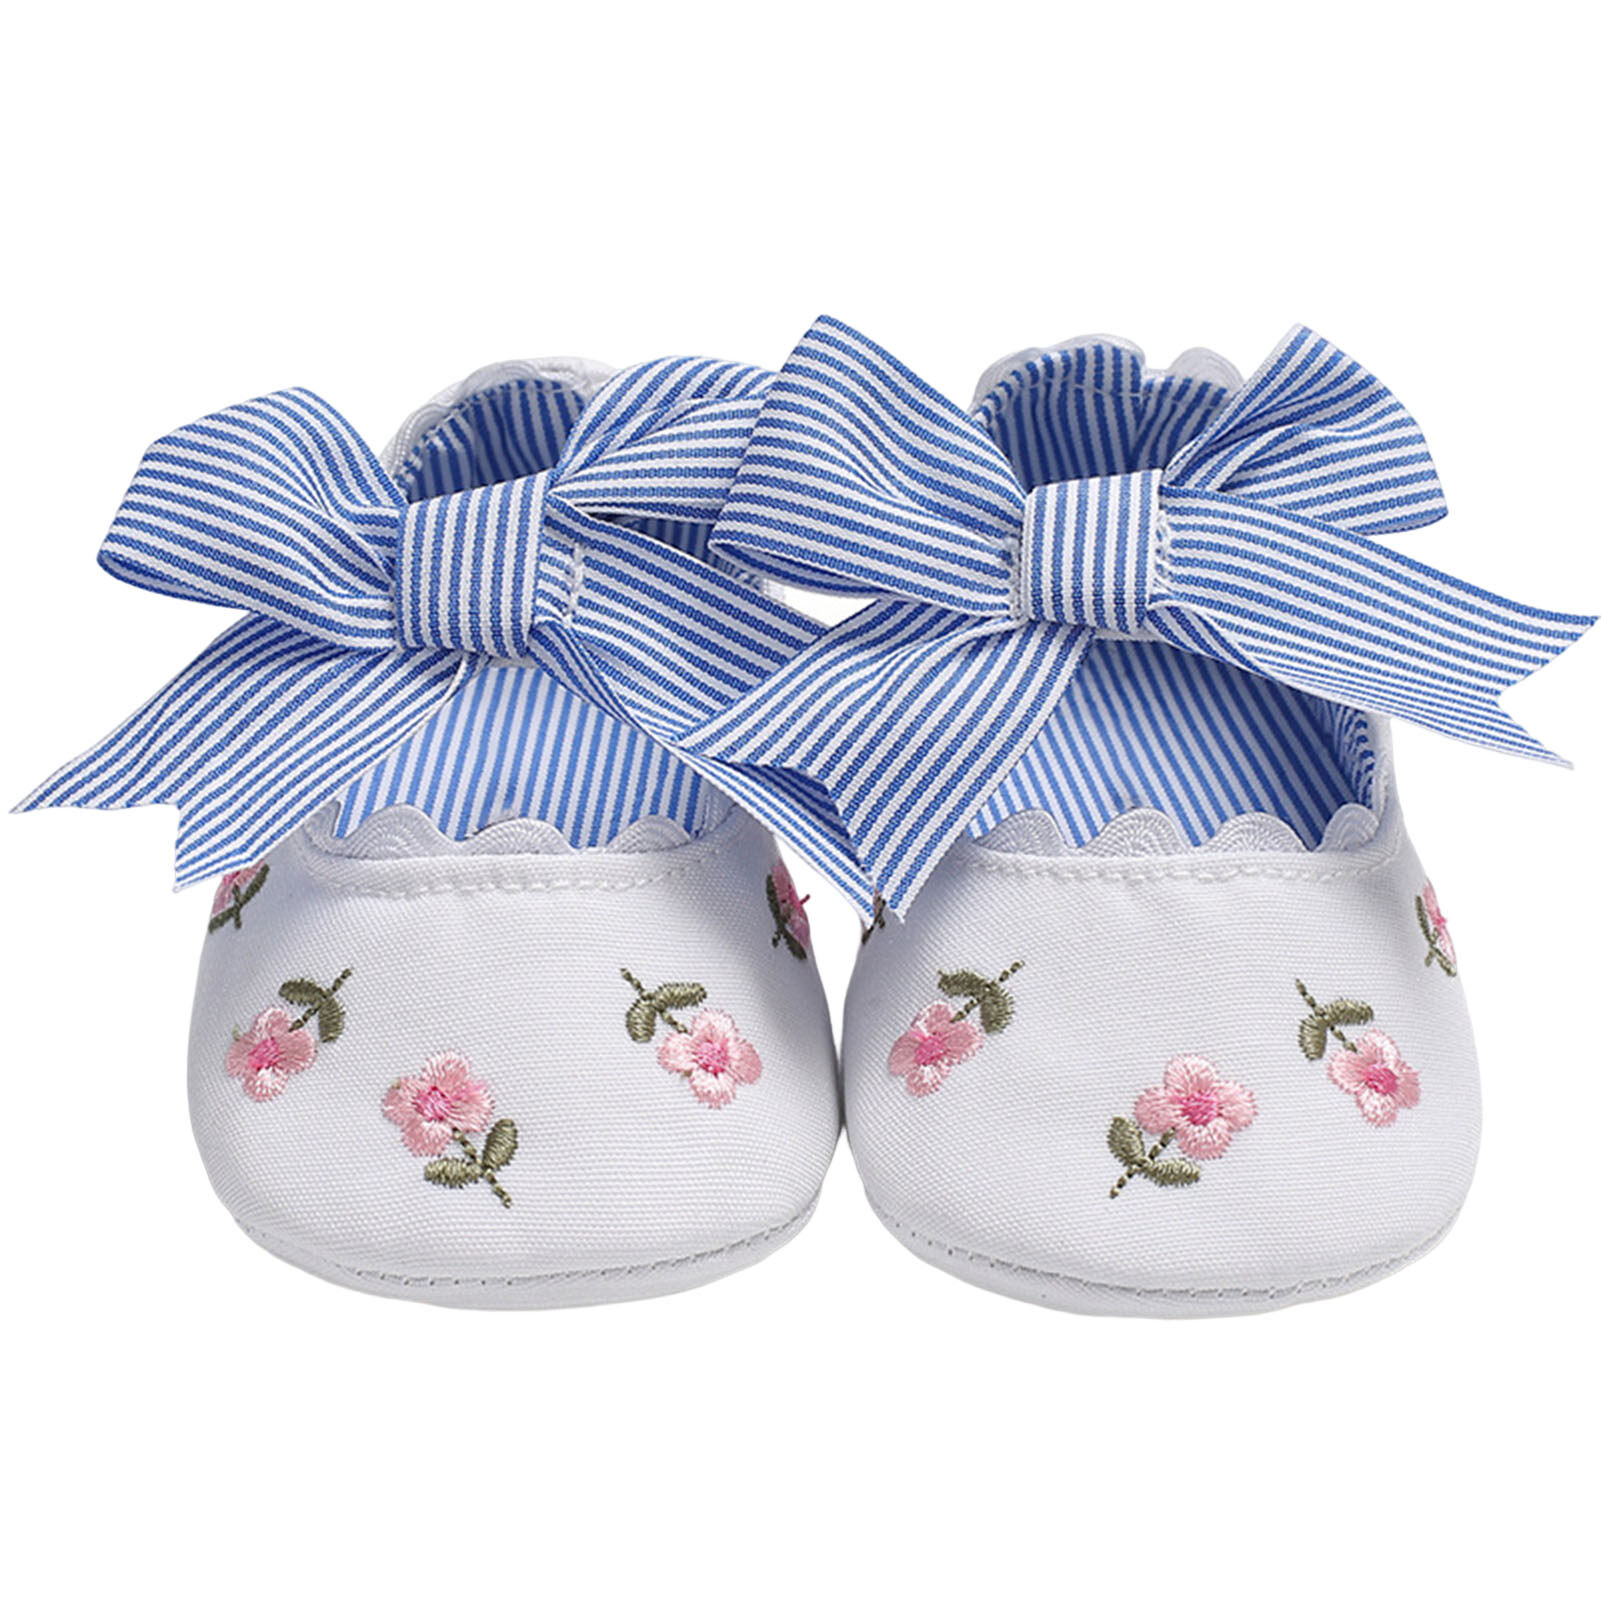 Adventure Toy 1 Pair Toddler Shoes Bow-knot Design Embroidery Pattern Non